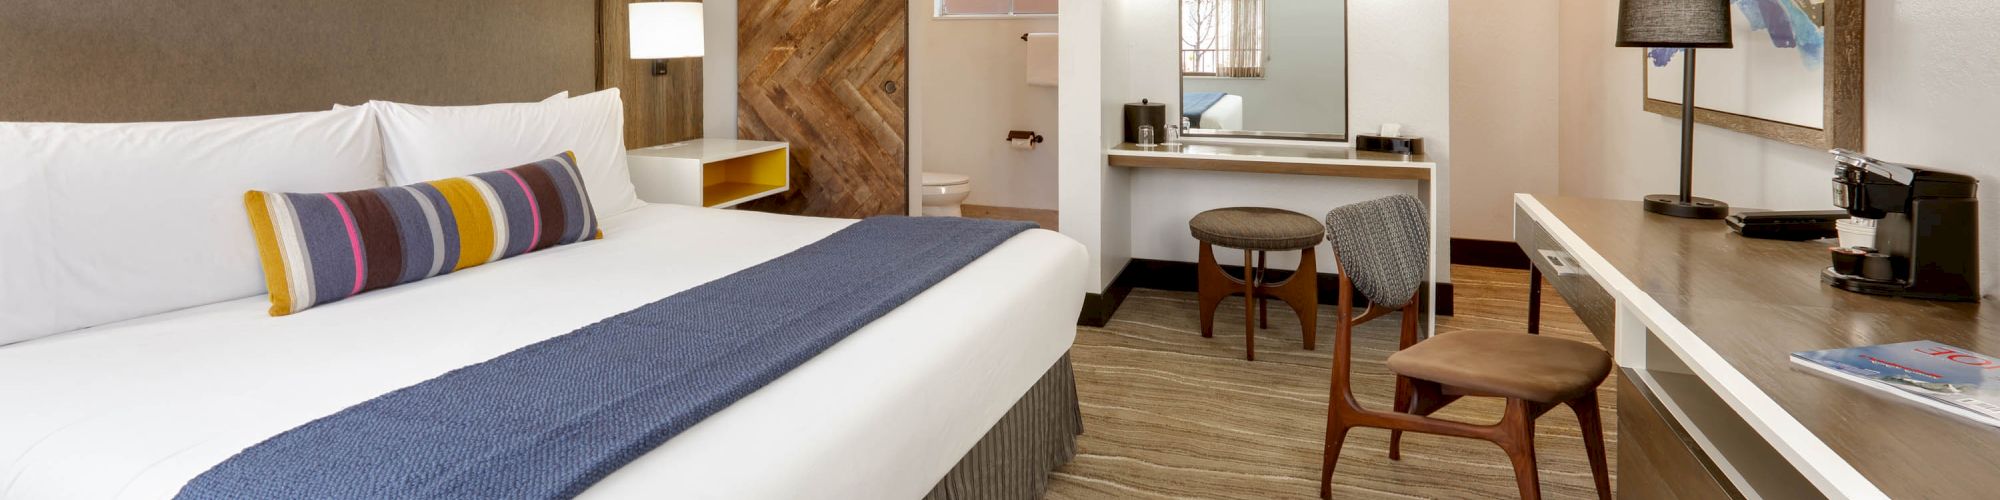 This image shows a modern hotel room with a king-sized bed, a desk, a chair, and a bathroom with a sliding barn door.